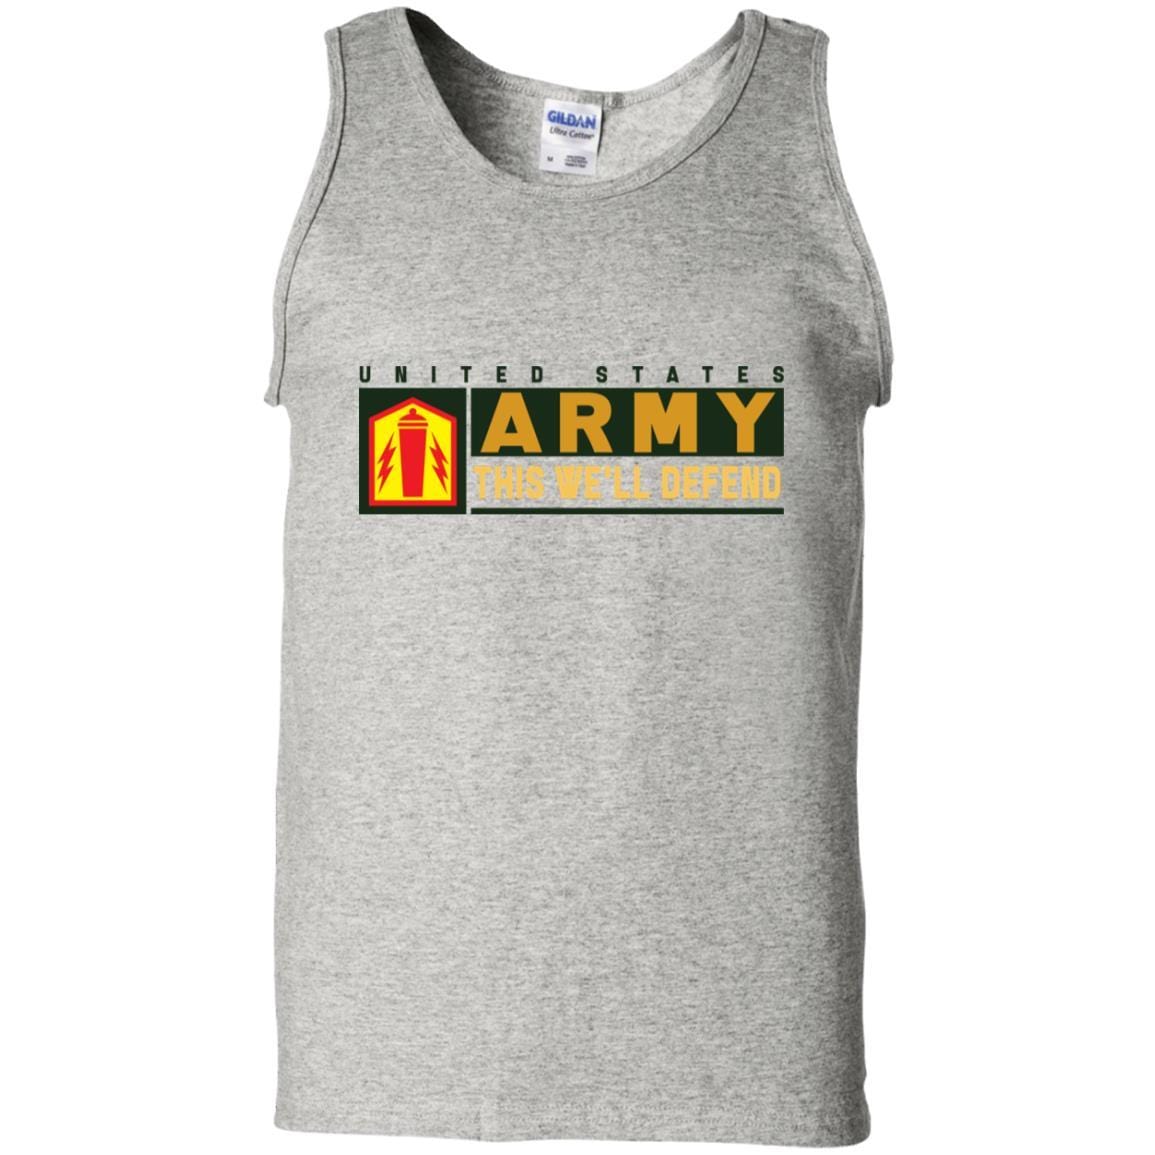 US Army 41 FIRES BRIGADE- This We'll Defend T-Shirt On Front For Men-TShirt-Army-Veterans Nation